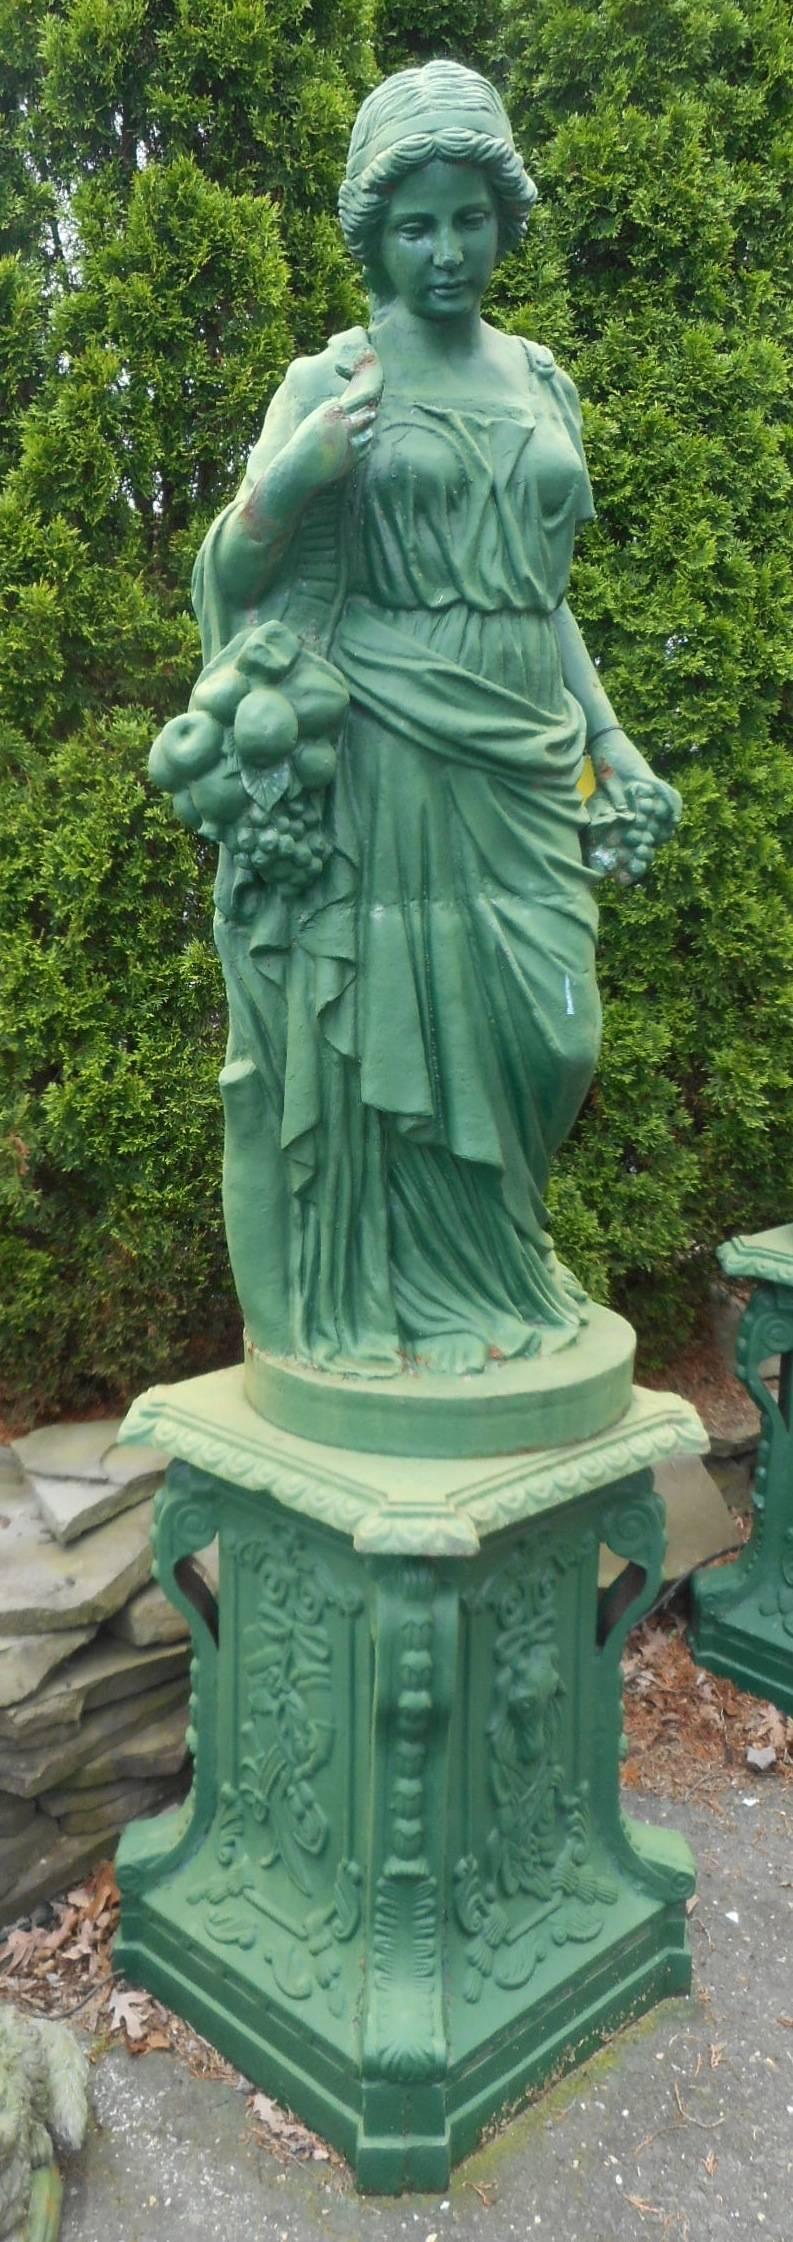 cast iron statues for sale